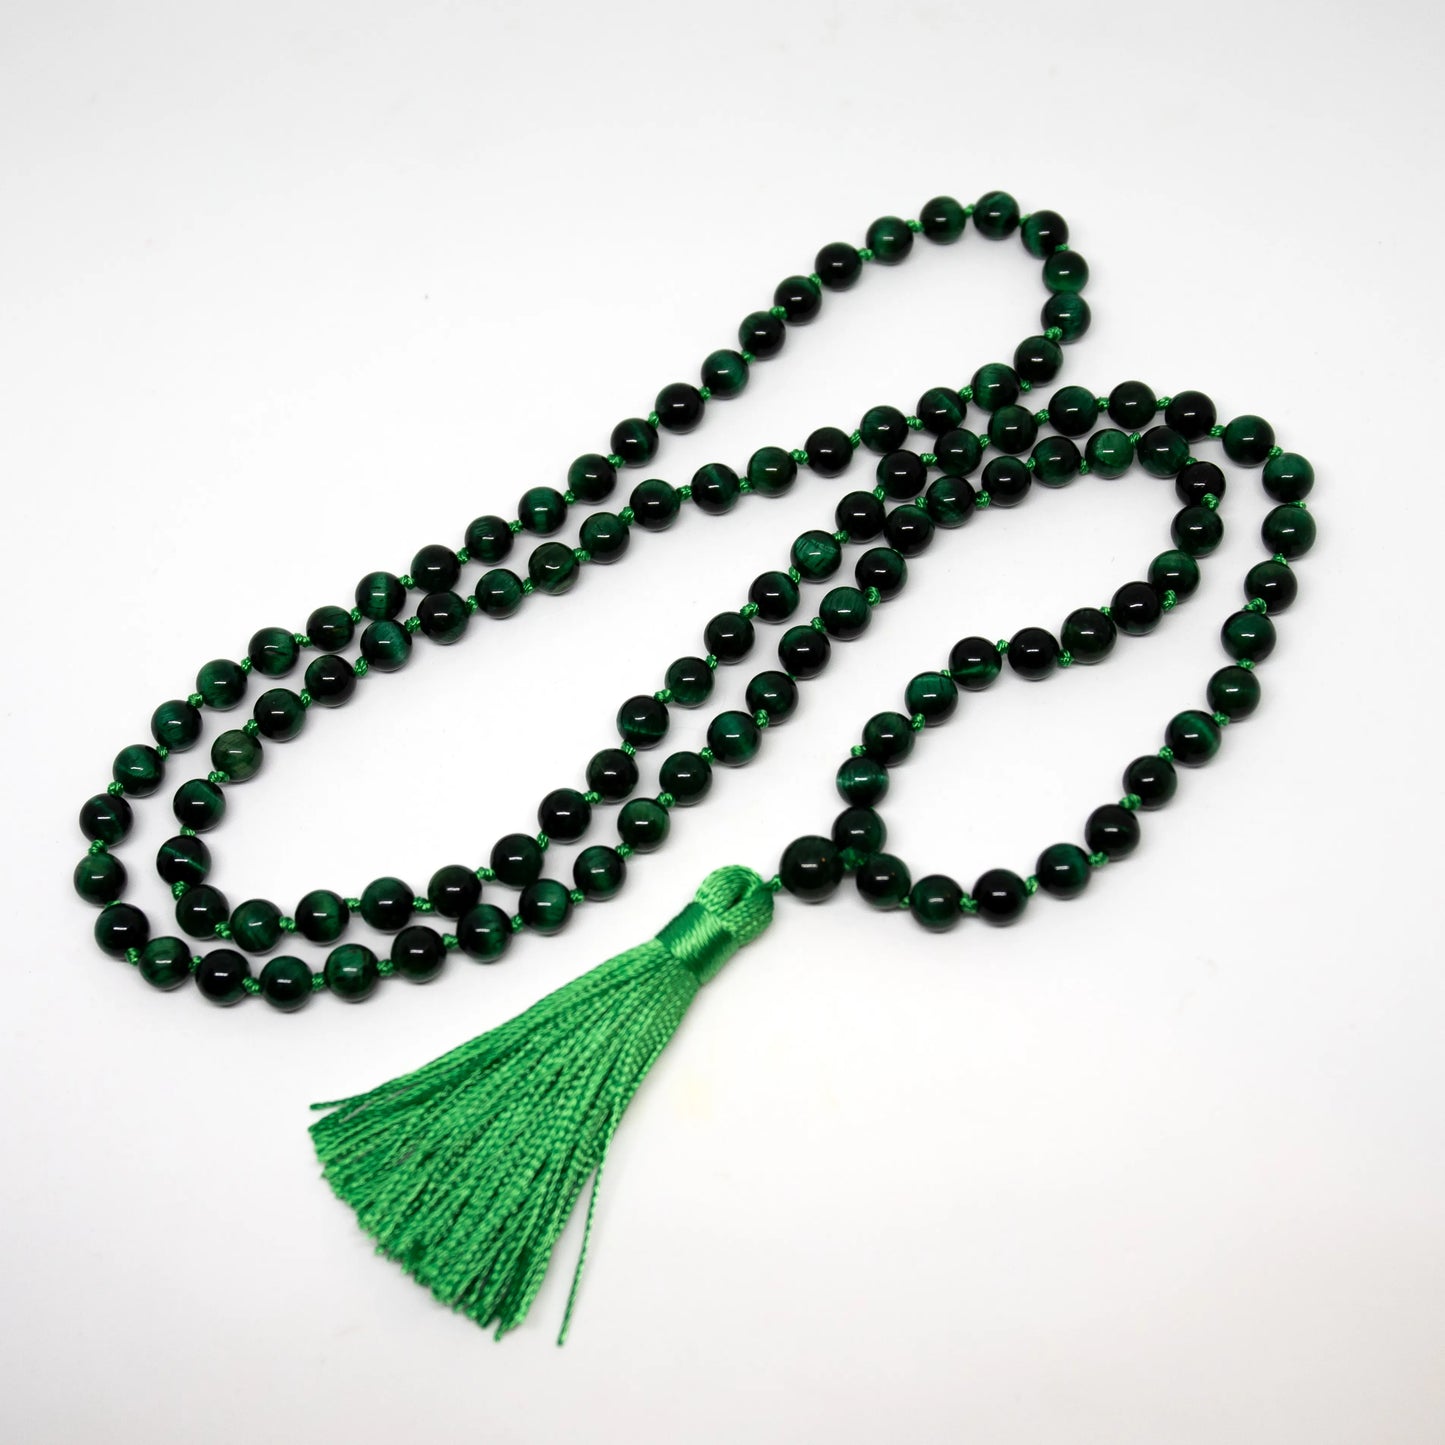 Green Tiger's Eye Knotted 108 Bead Mala - Prayer Beads - 8mm (1 Pack)